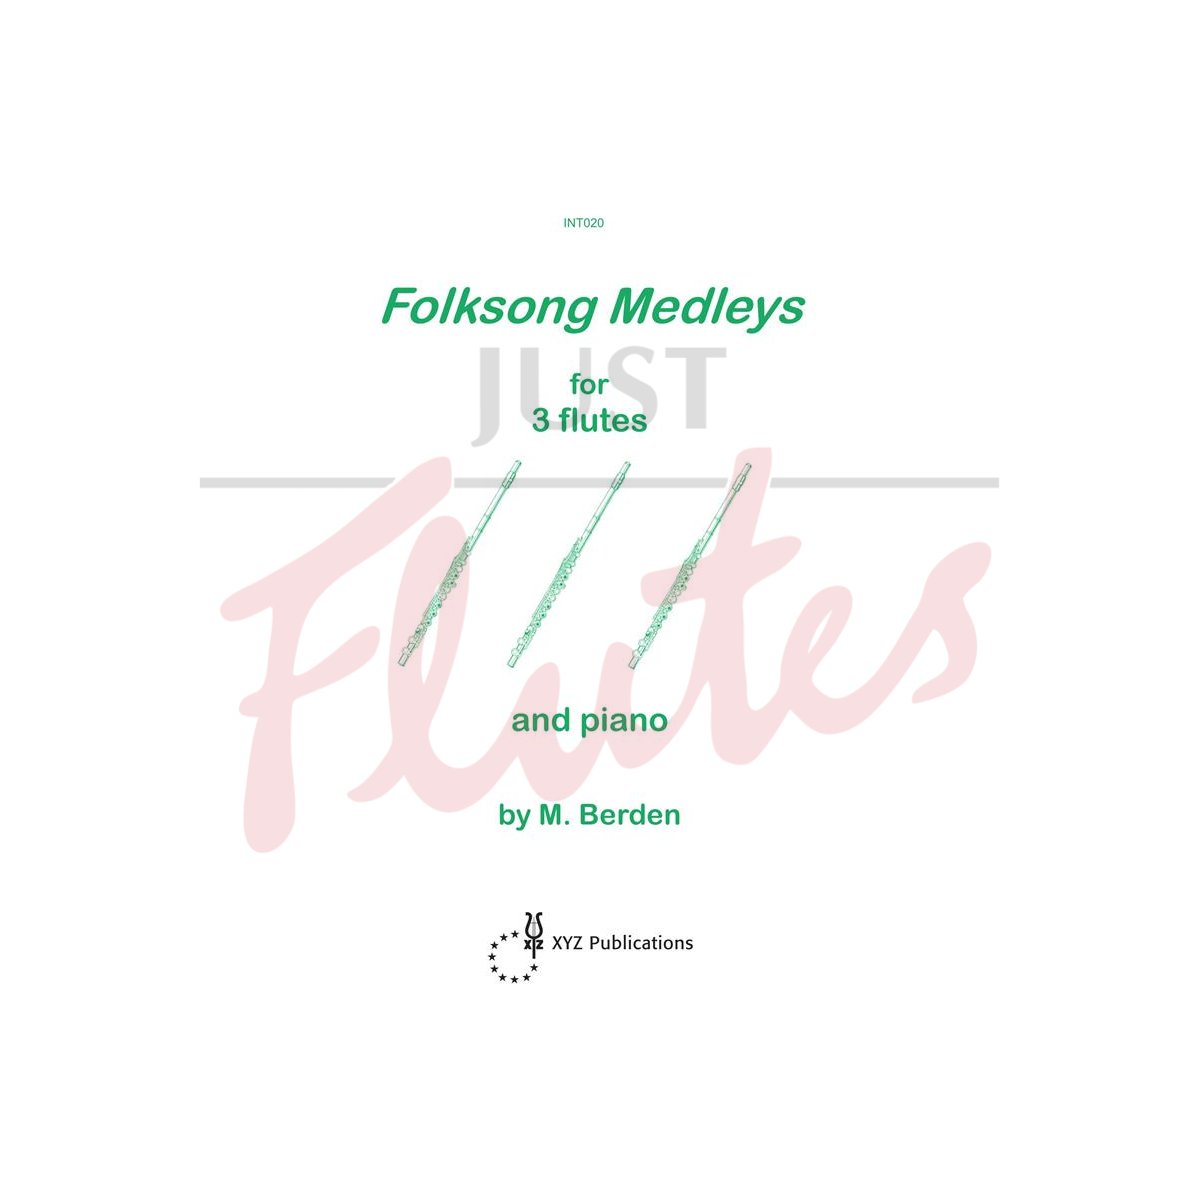 Folksong Medleys for Three Flutes and Piano